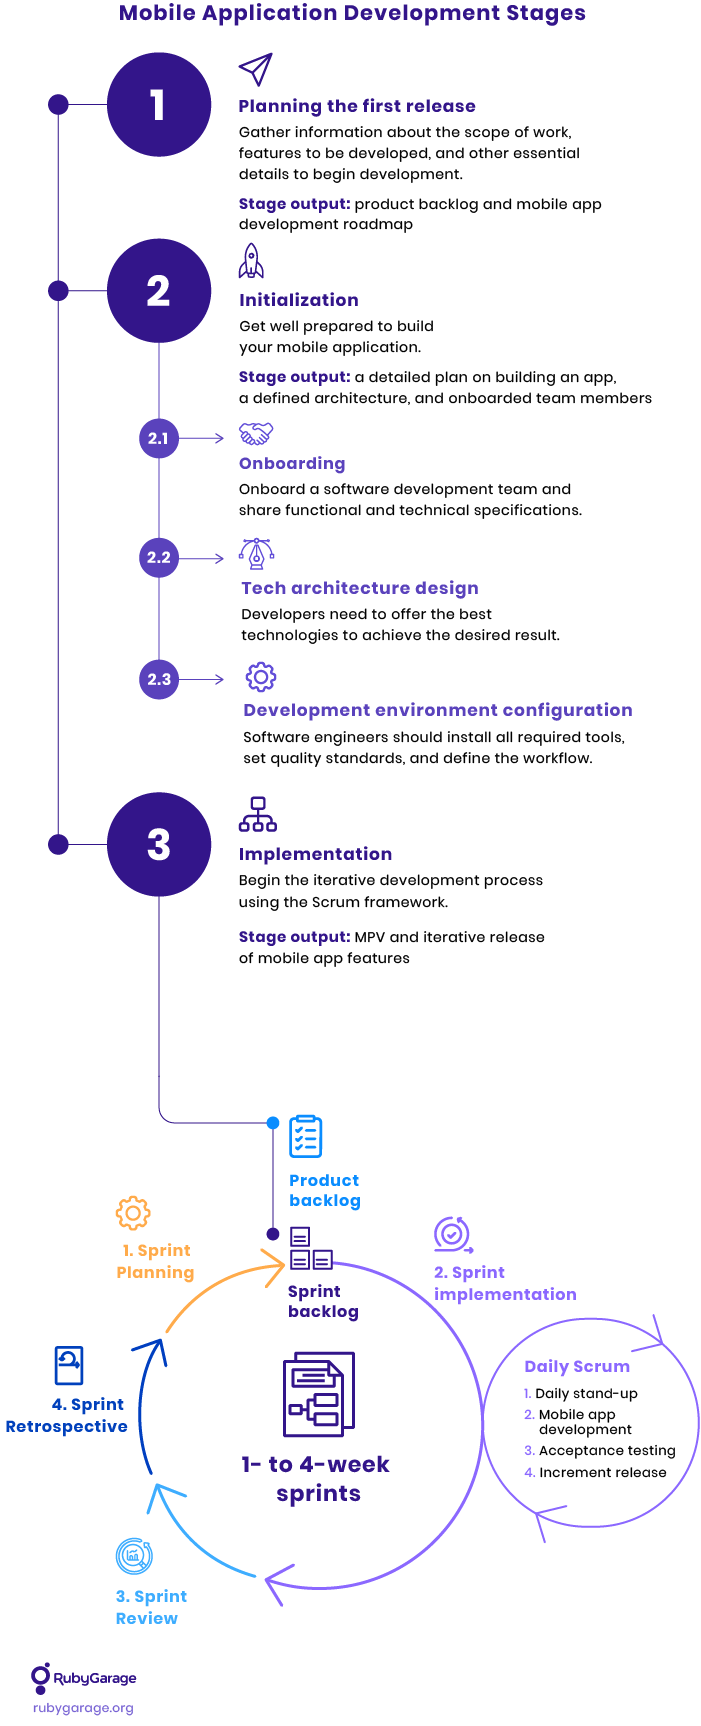 Mobile App Development Stages